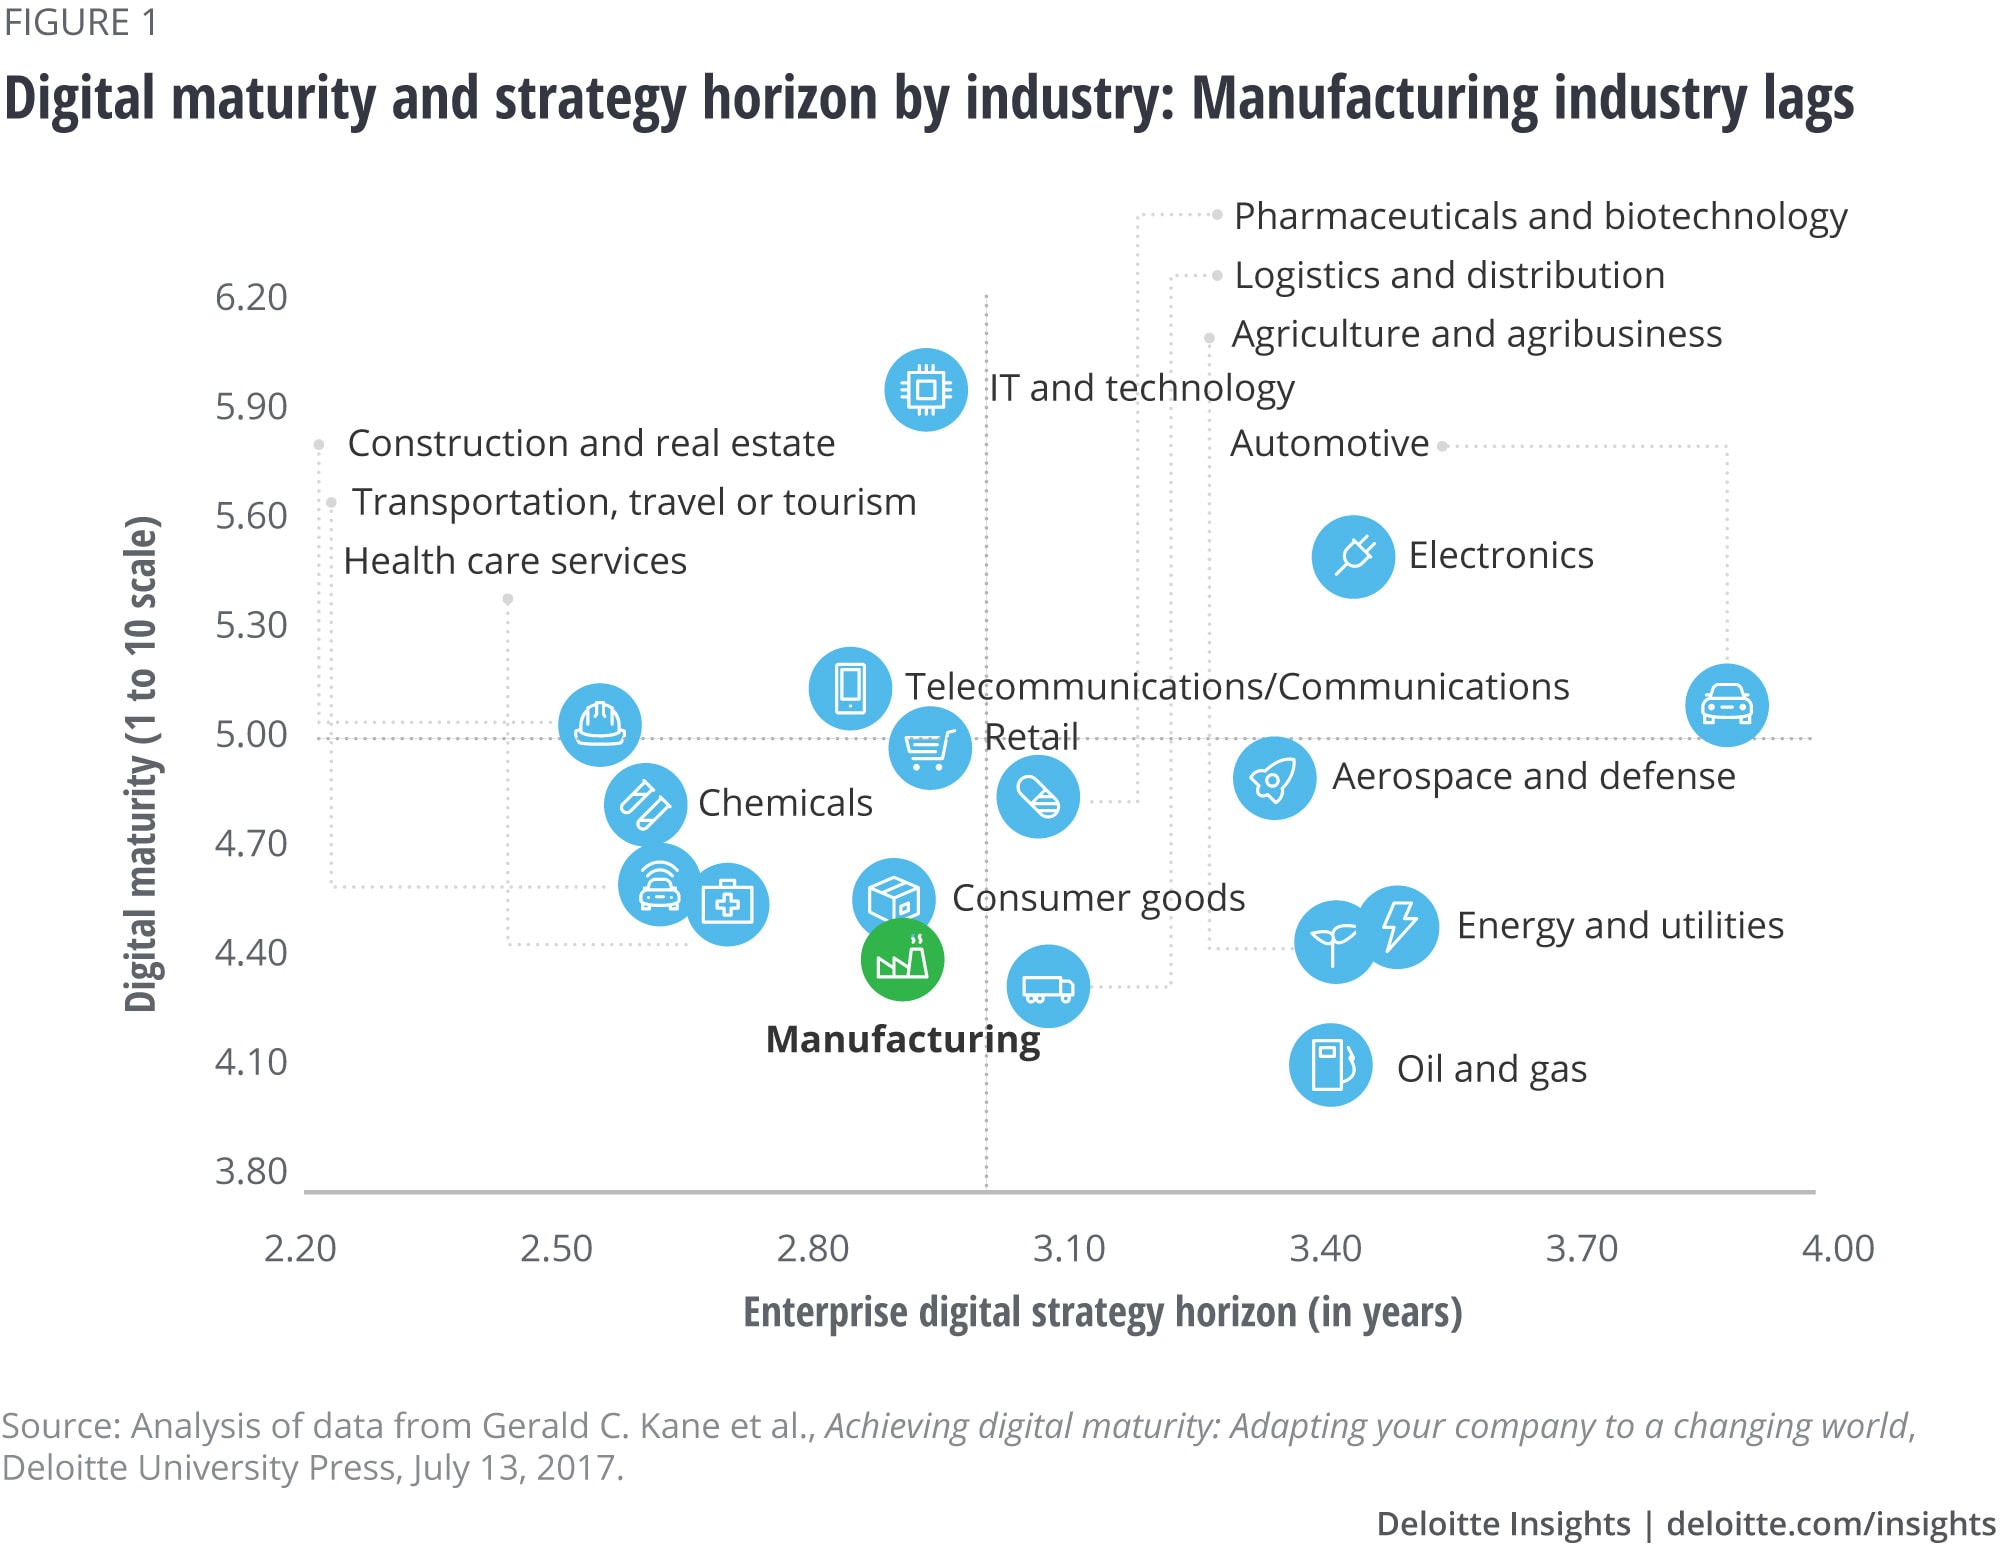 Digital maturity and strategy horizon by industry: Manufacturing industry lags